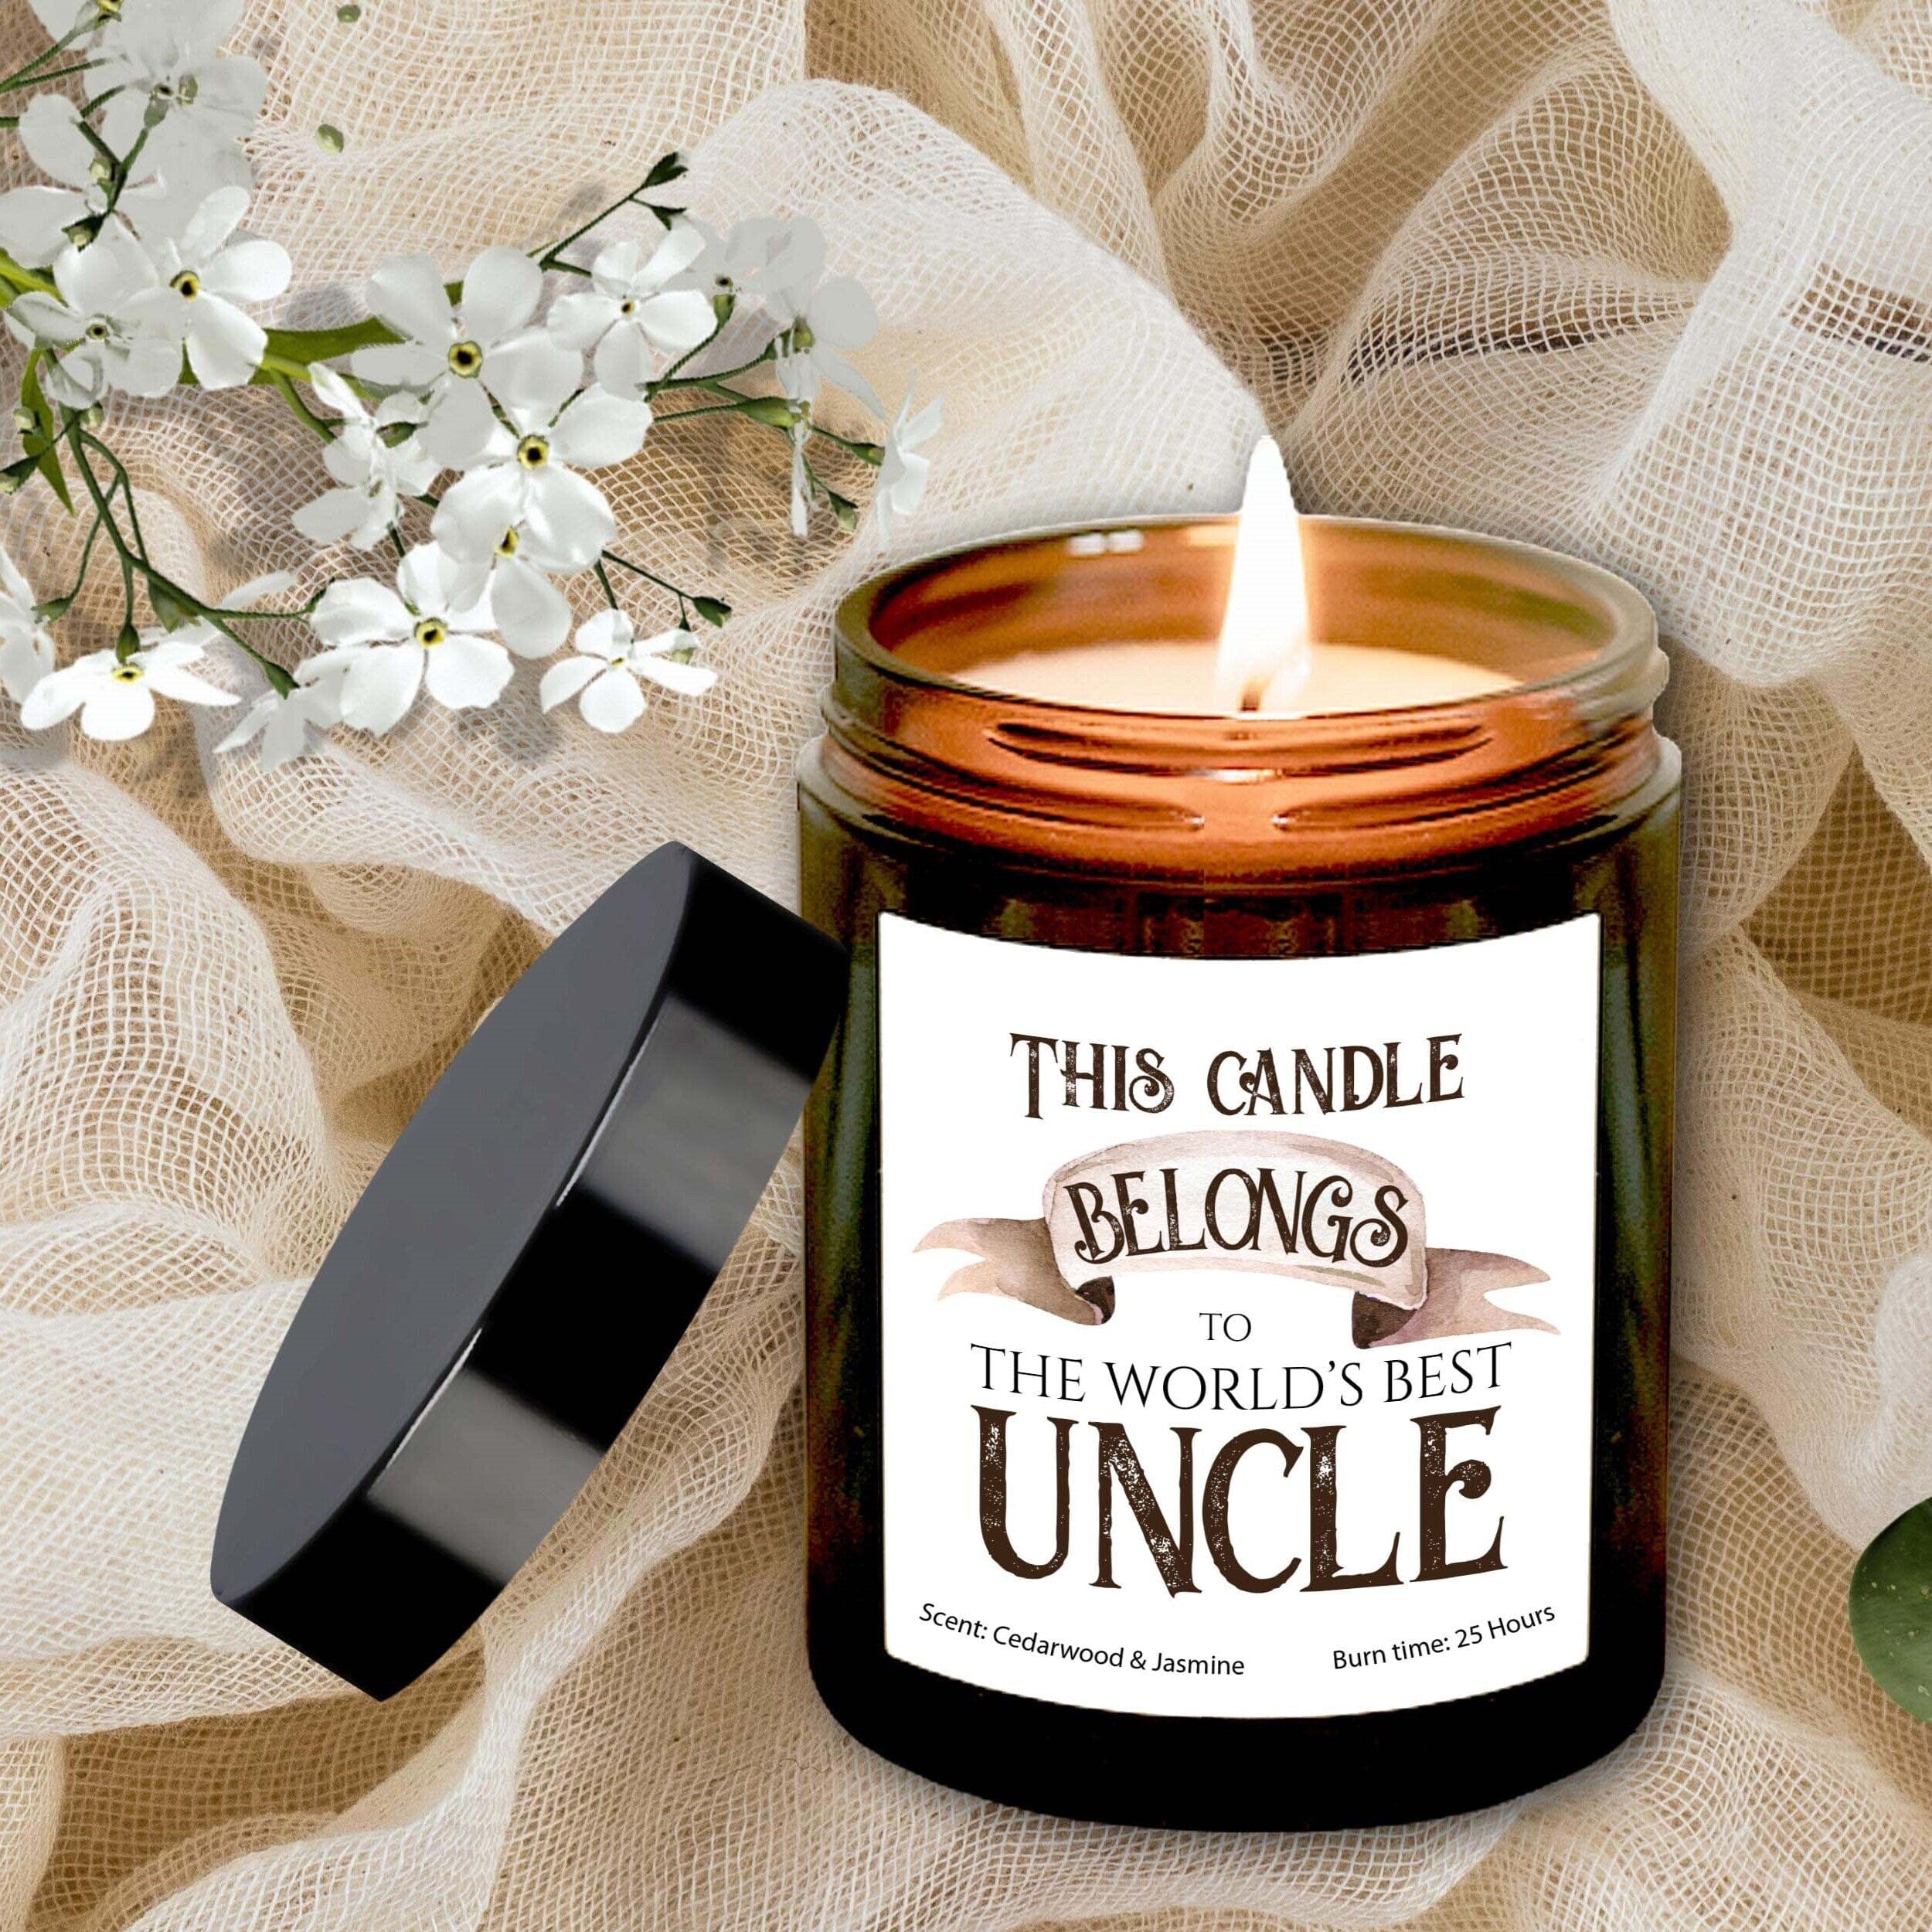 This Candle Belongs to The World's Best Uncle Scented Candle, Gift for Uncle